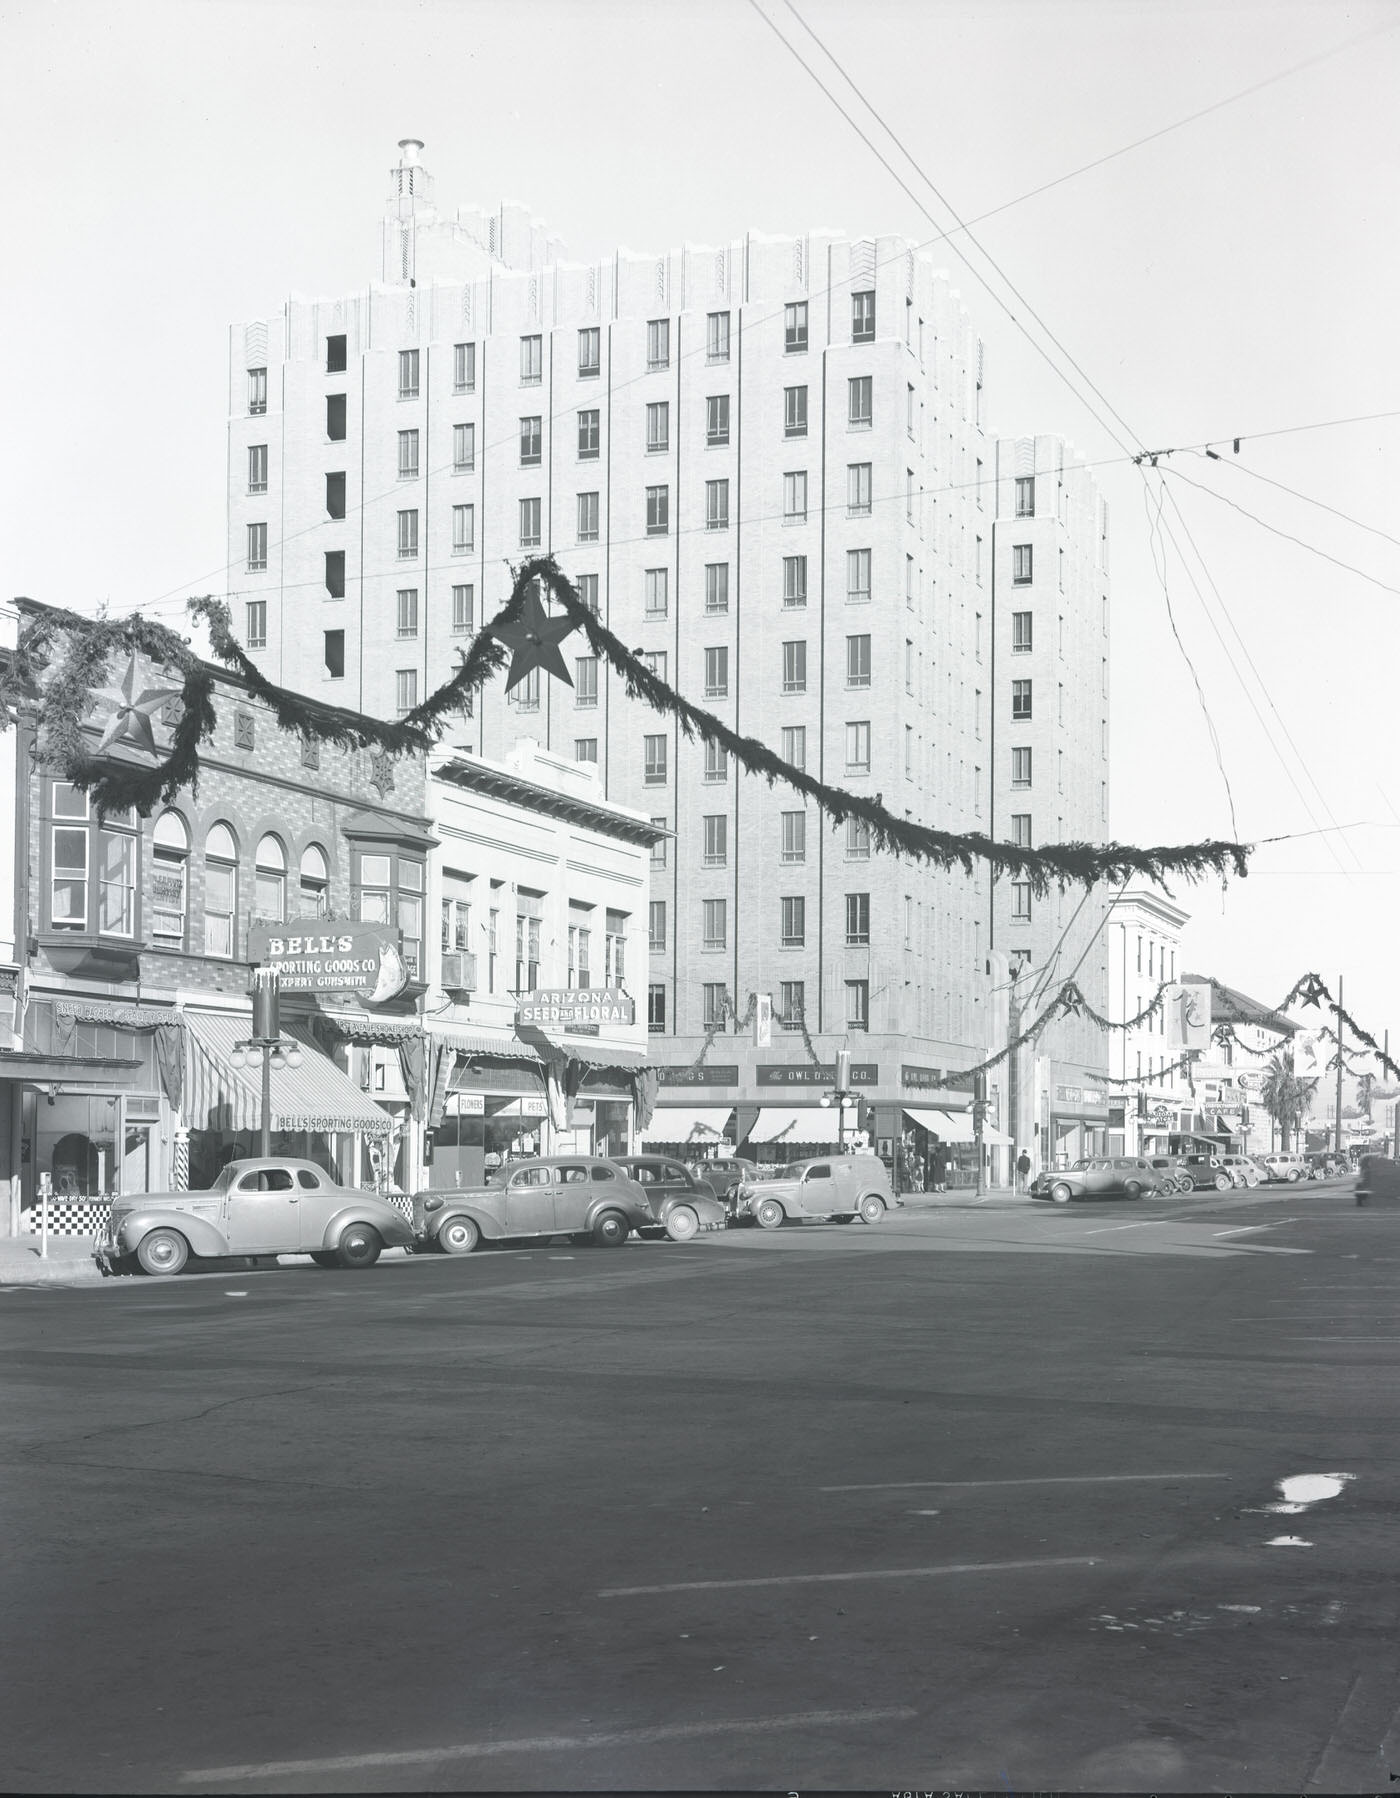 1st Avenue. Depicts the 40 block of N. 1st Ave. Visible are Bell's Sporting Goods (40 N. 1st), New Arizona Seed & Floral Co. (46 N. 1st), and Christmas decorations, 1941